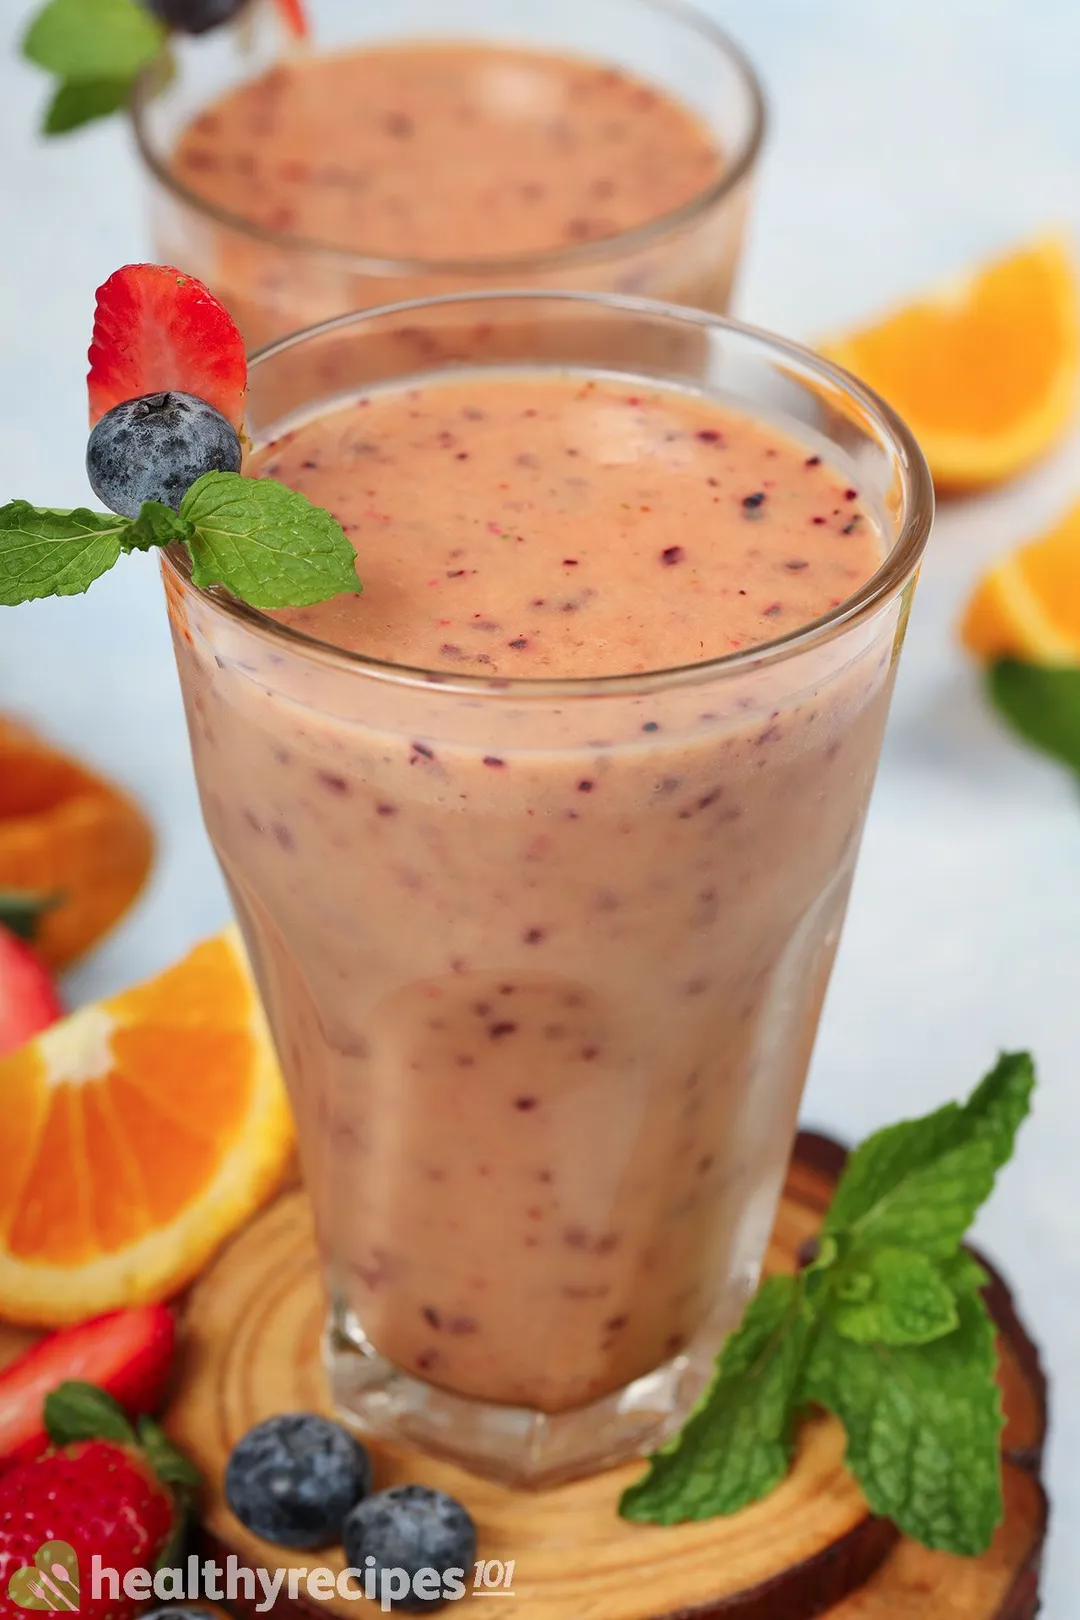 Two glasses of Mango Berry Smoothie placed on a wooden board near strawberries, blueberries, and half an orange.